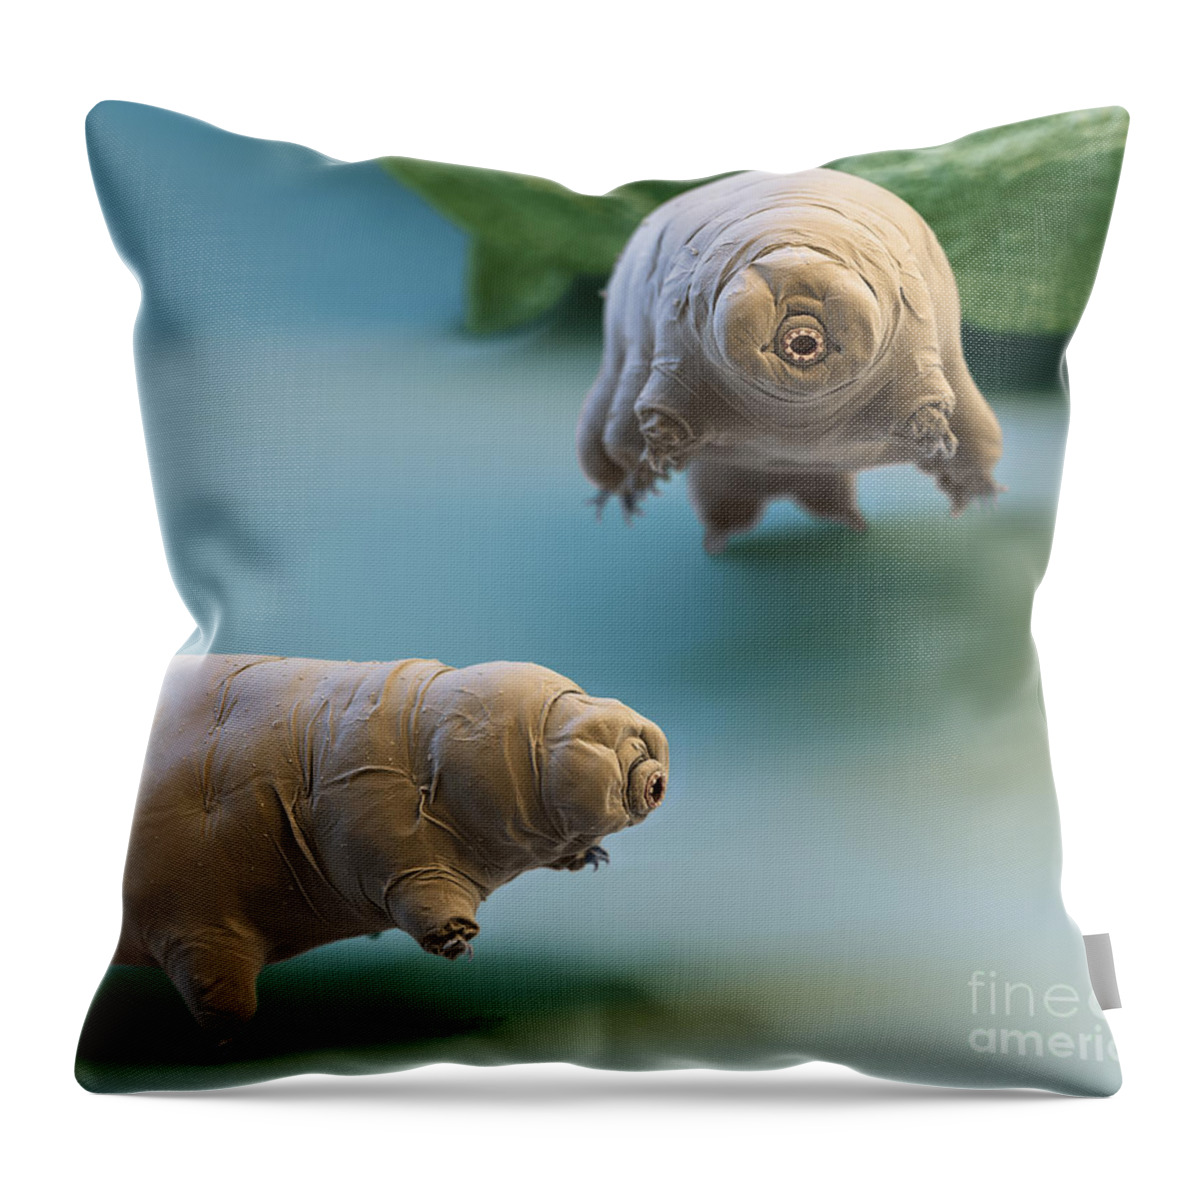 Paramacrobiotus Fairbanki Throw Pillow featuring the photograph Water Bear by Eye of Science and Science Source